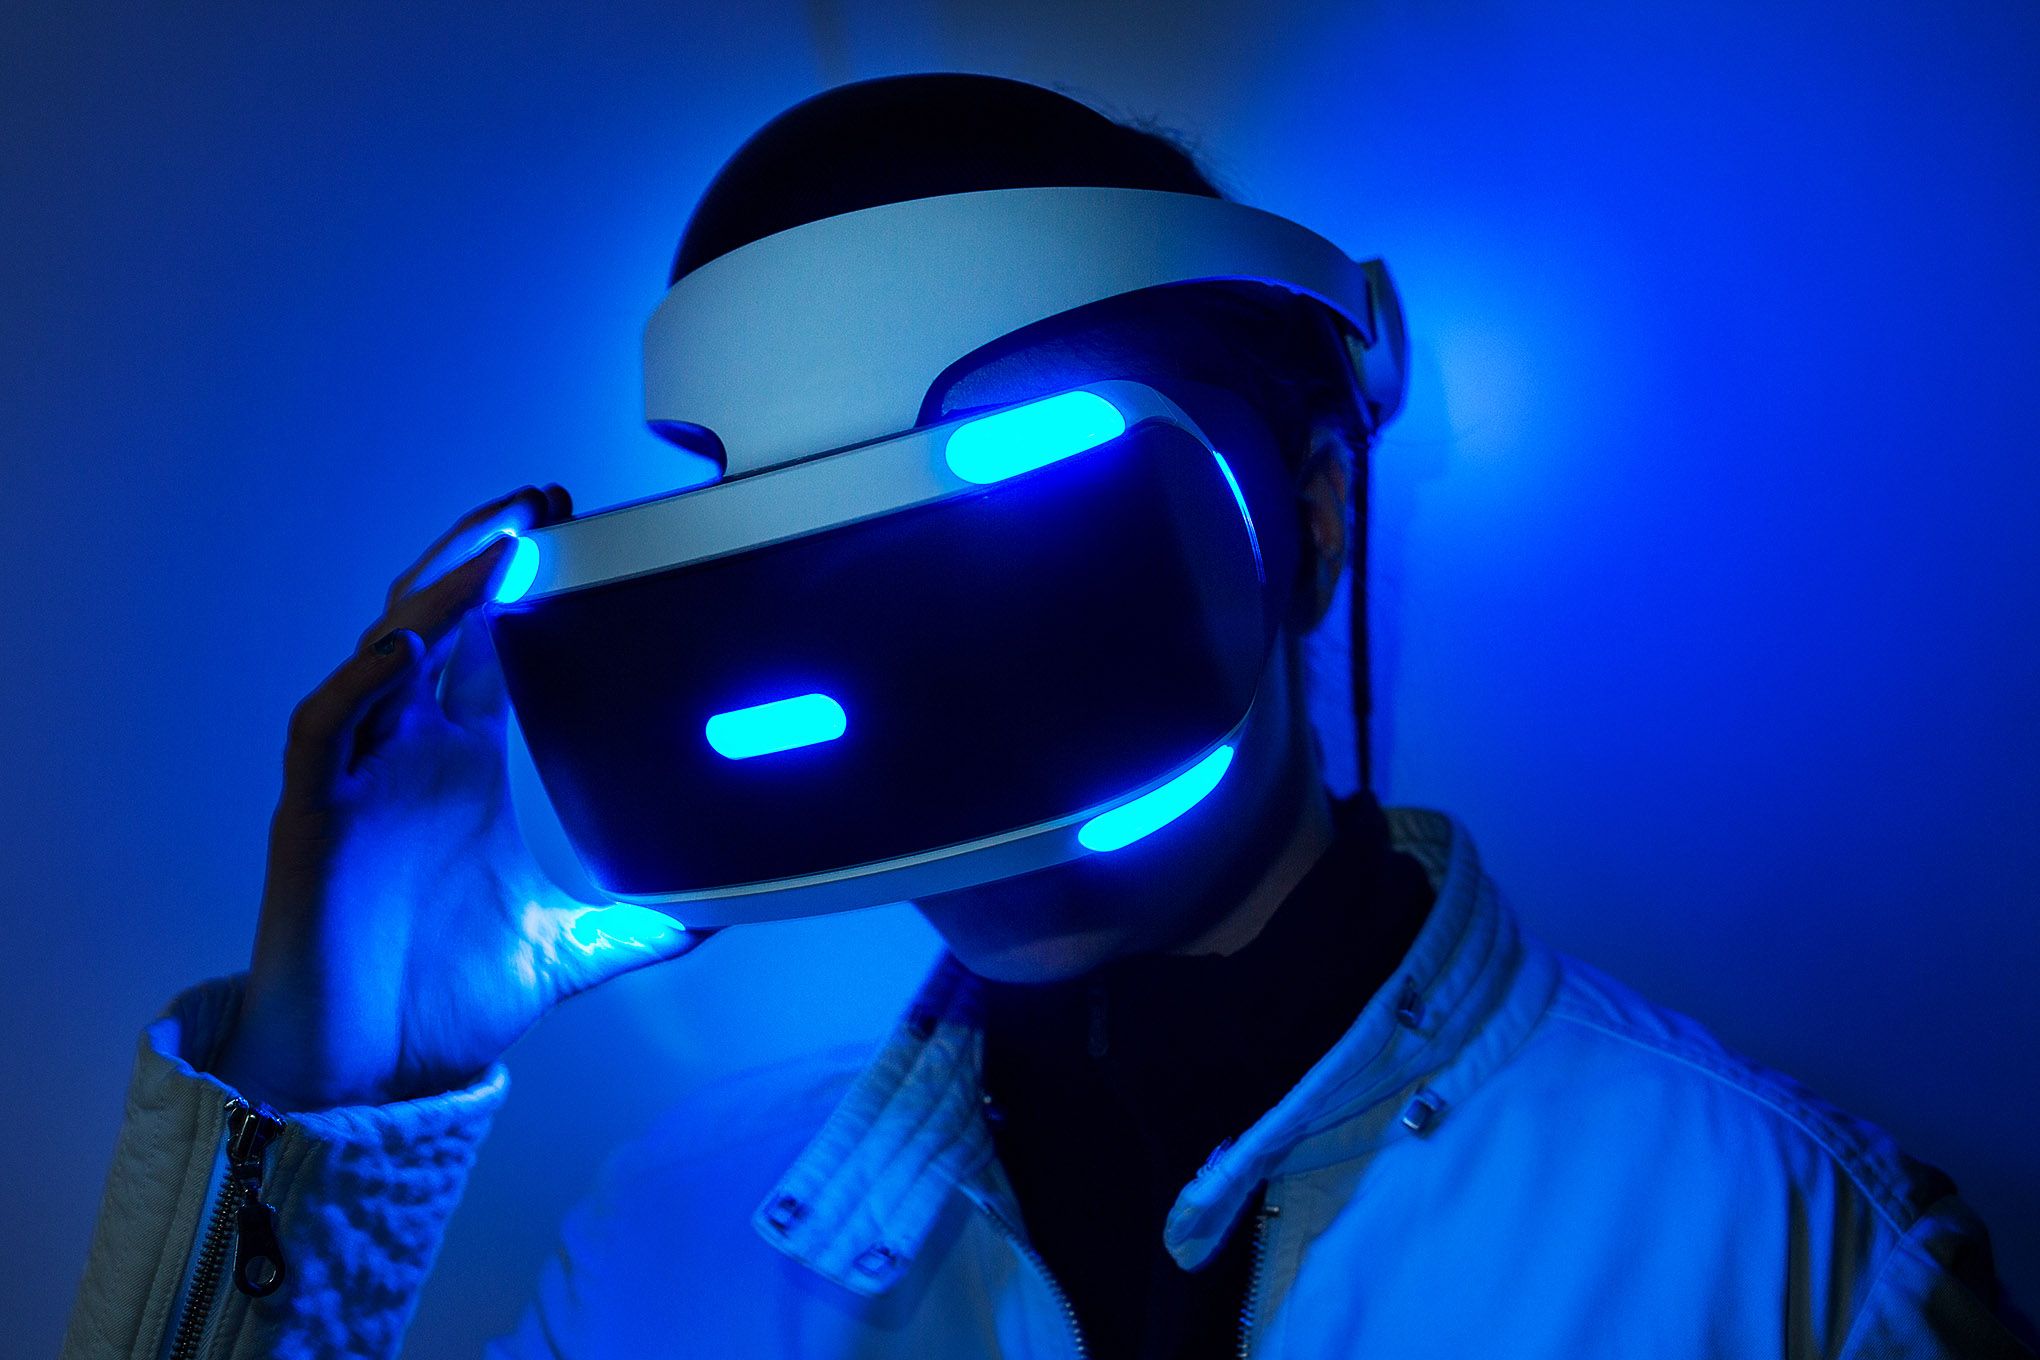 Playstation VR Review: a must for any gamer - Movie TV Tech Geeks News